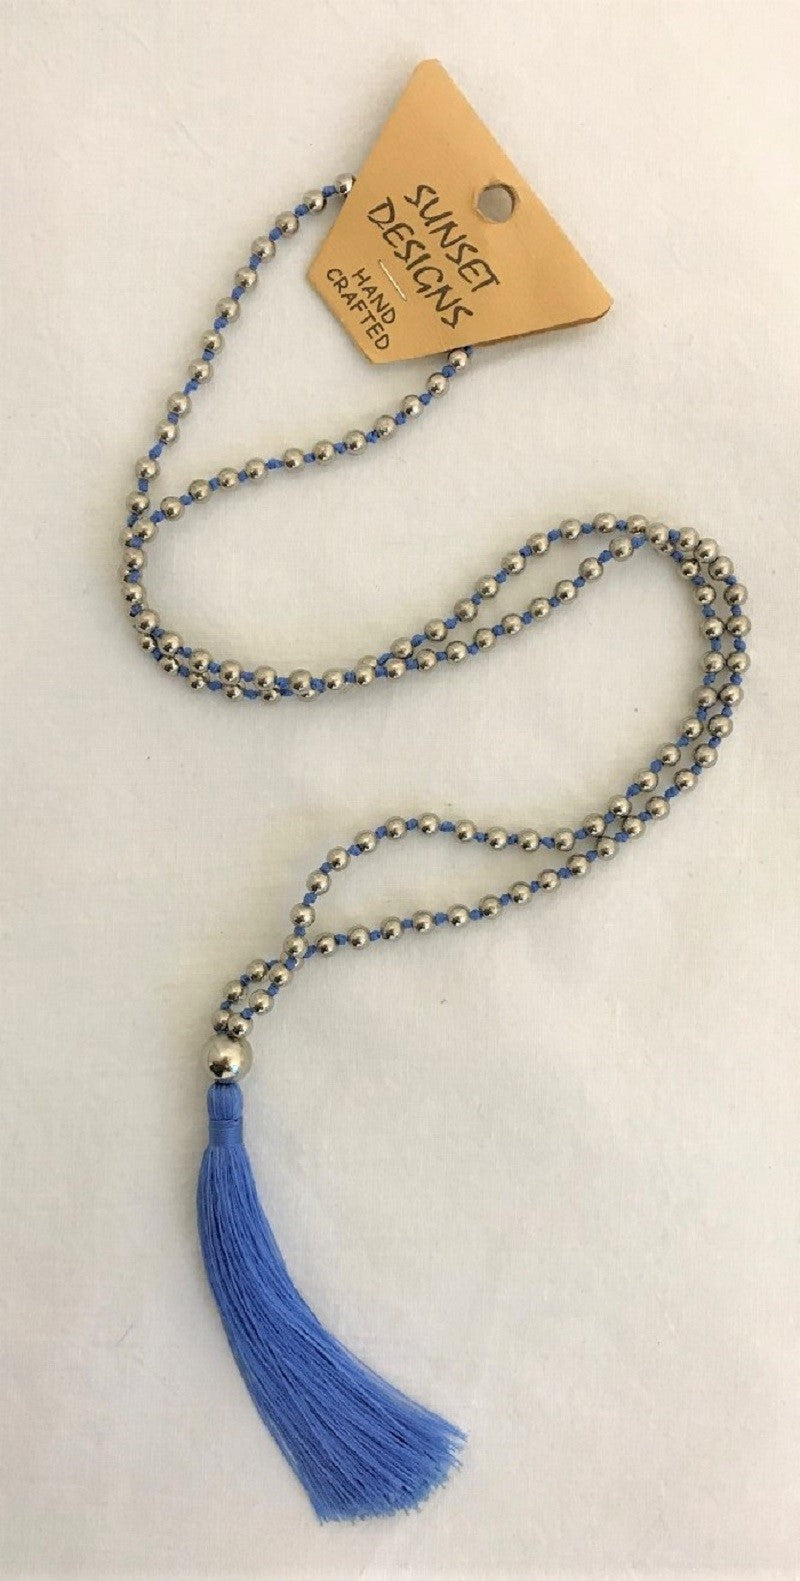 necklace - perwinkle blue - silver ball bead w/ string tassle